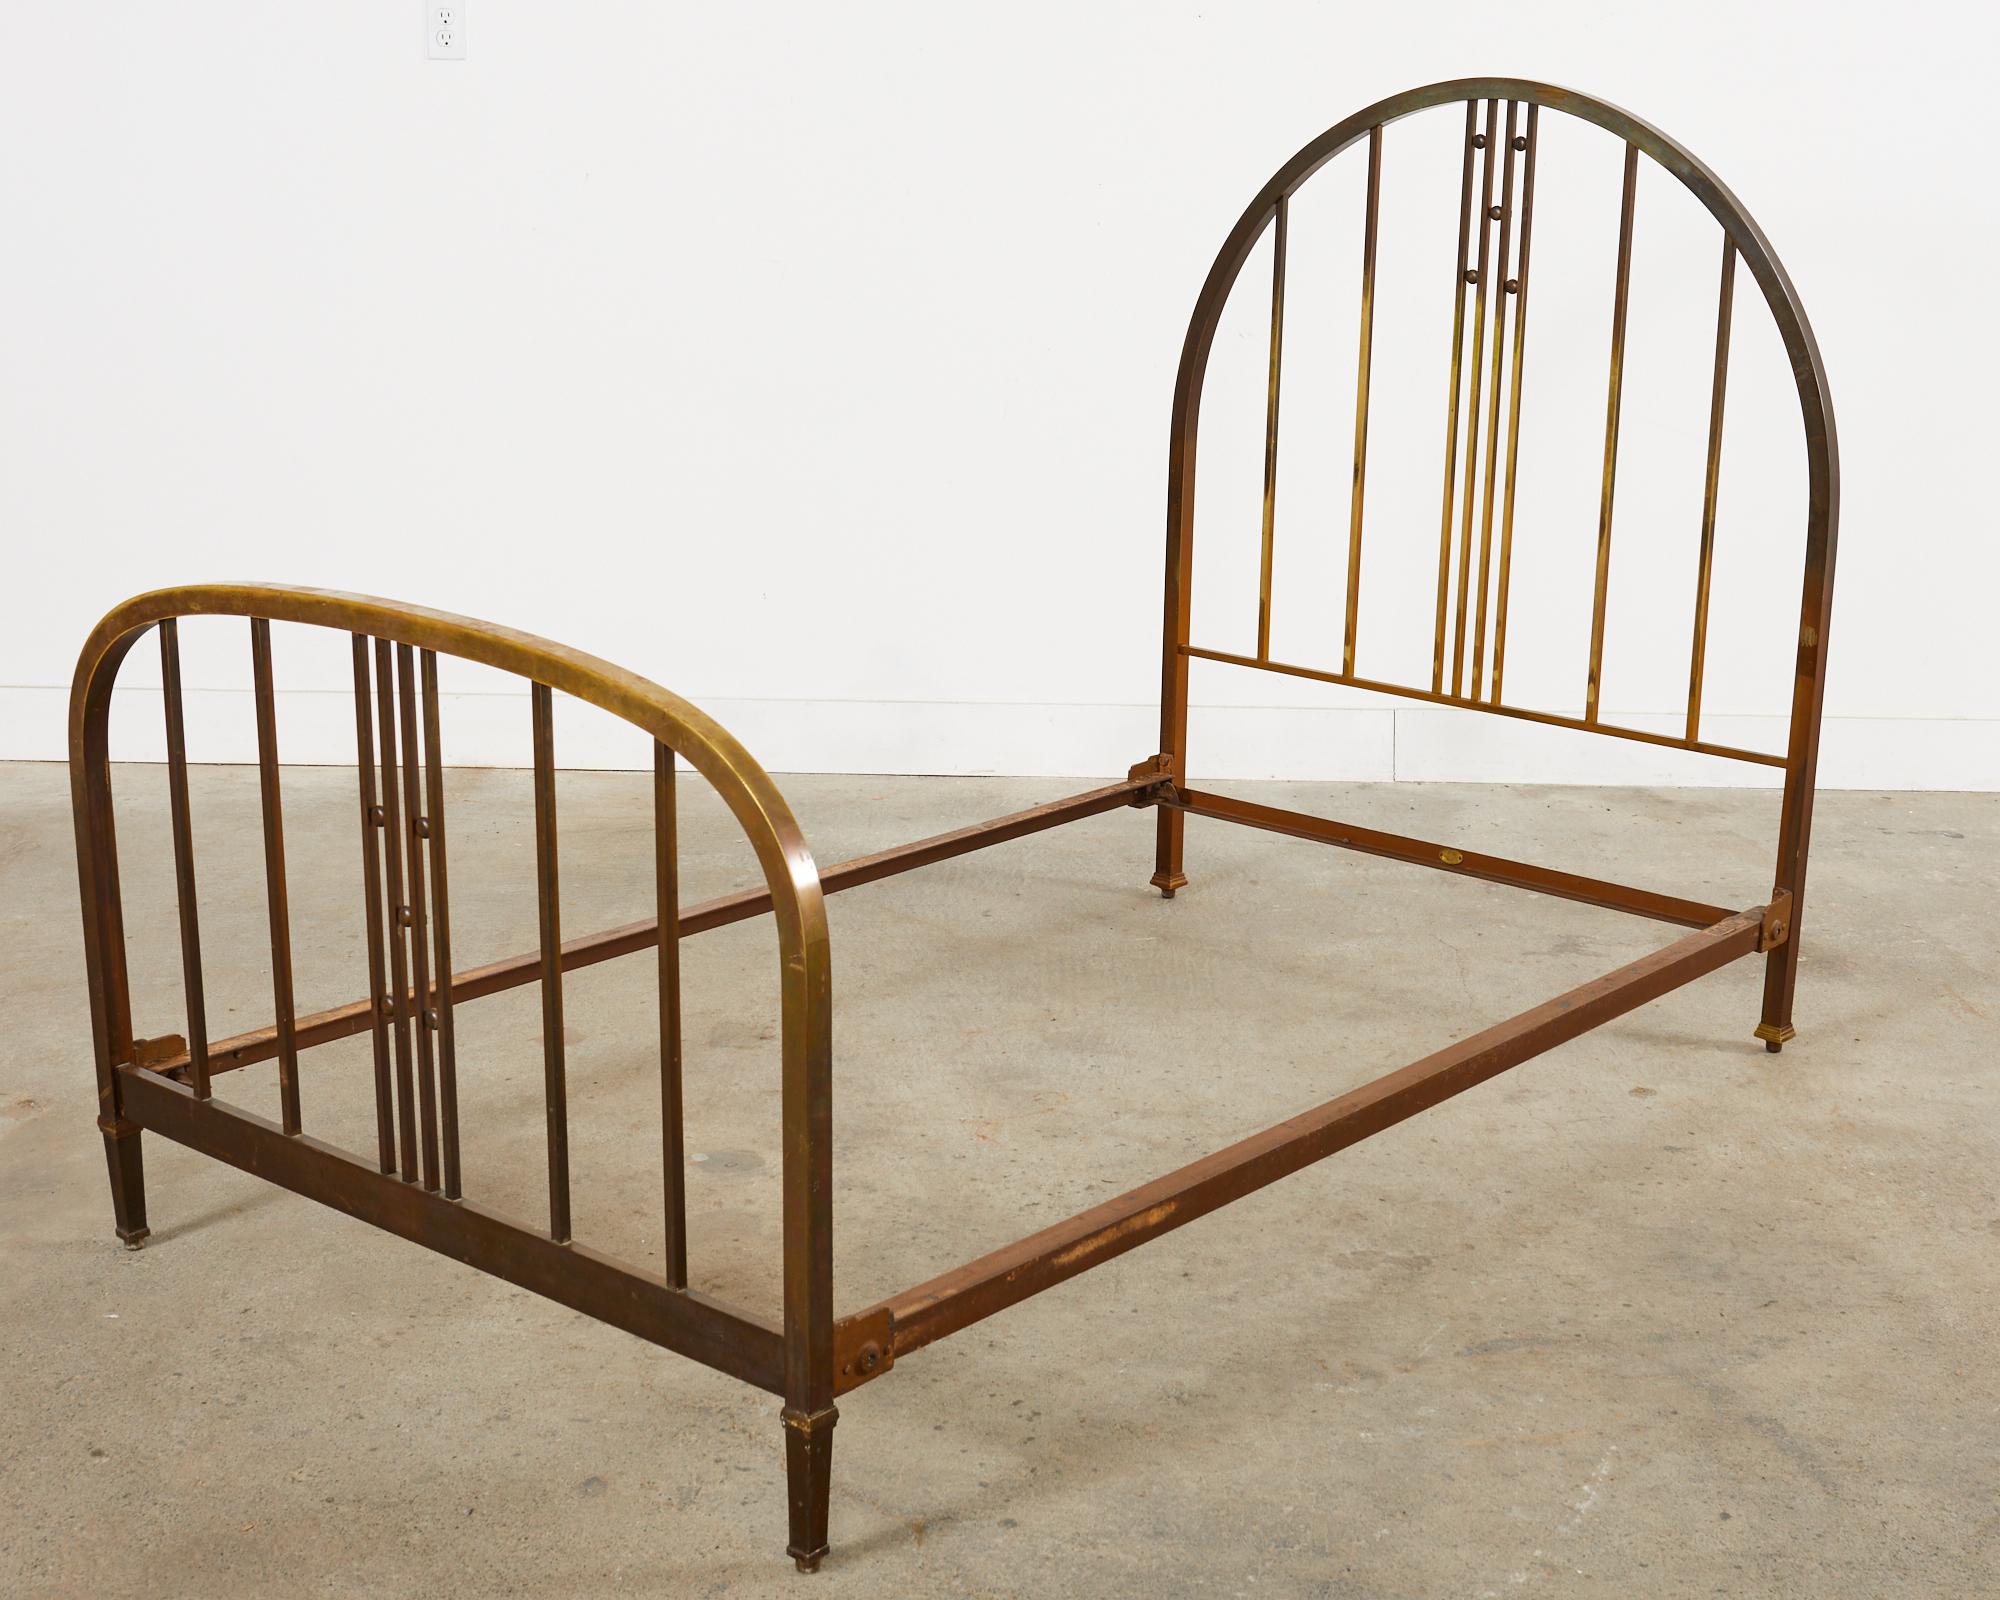 French Art Deco Period Patinated Brass Bed Frame For Sale 11